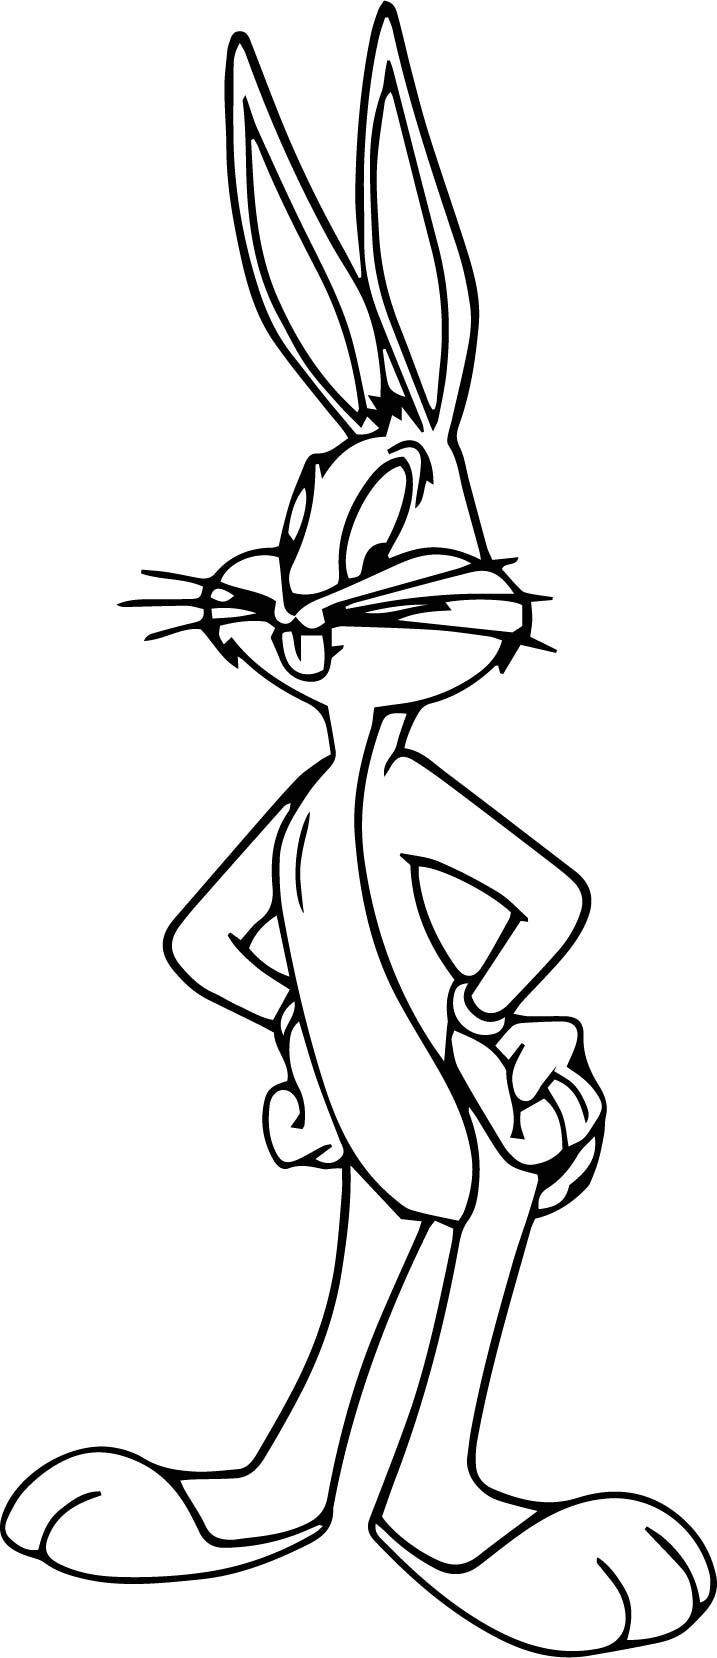 Bugs Bunny Coloring Pages at GetColorings.com | Free printable